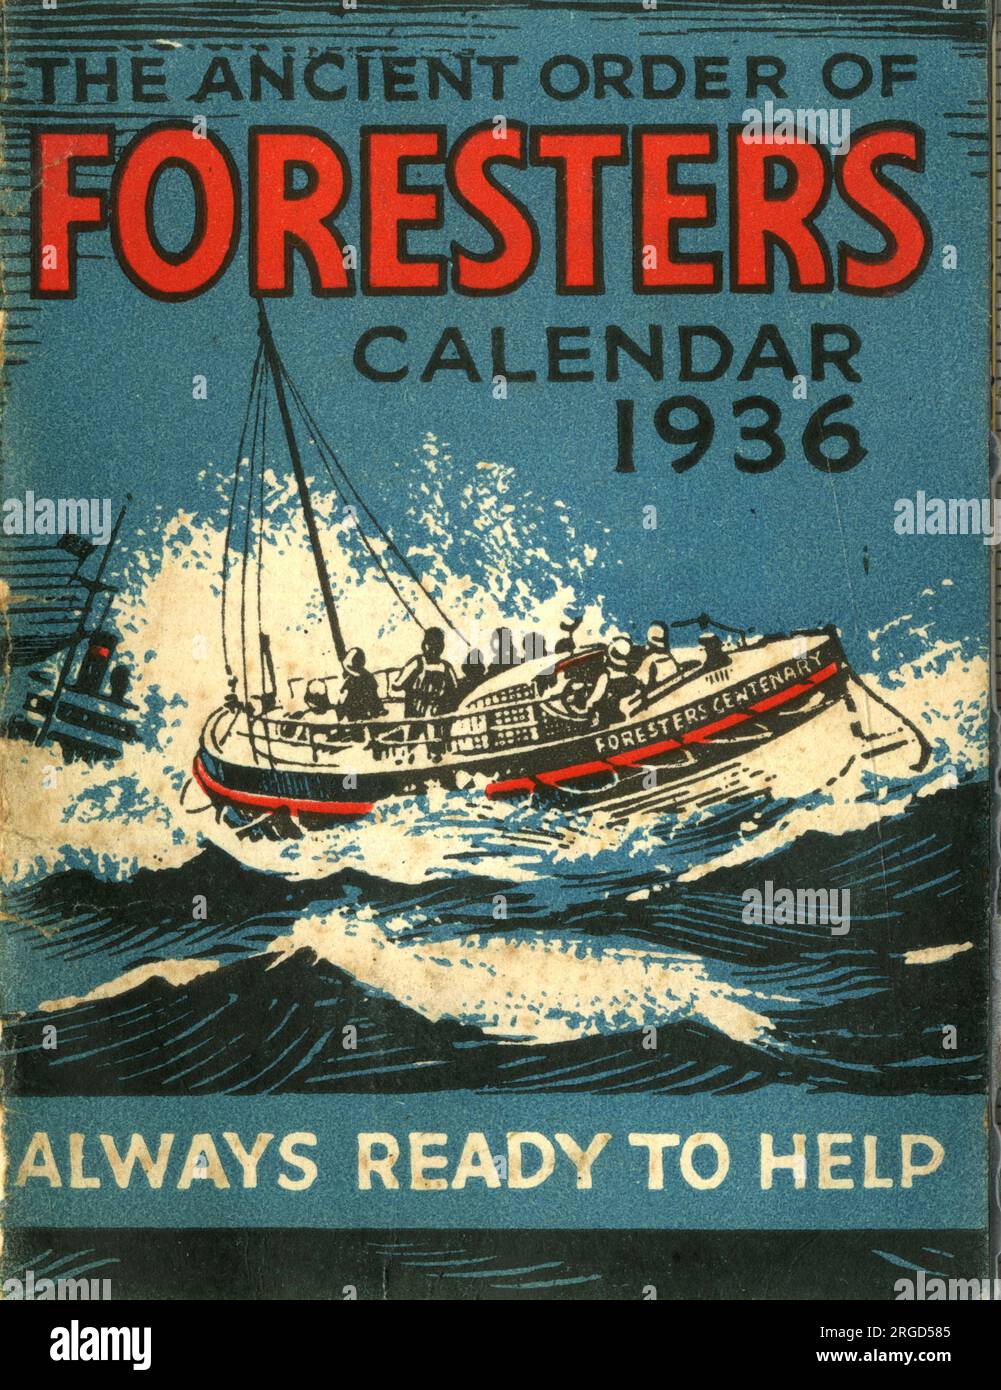 Calendar cover, The Ancient Order of Foresters, Always Ready To Help - lifeboat rescue scene. Stock Photo